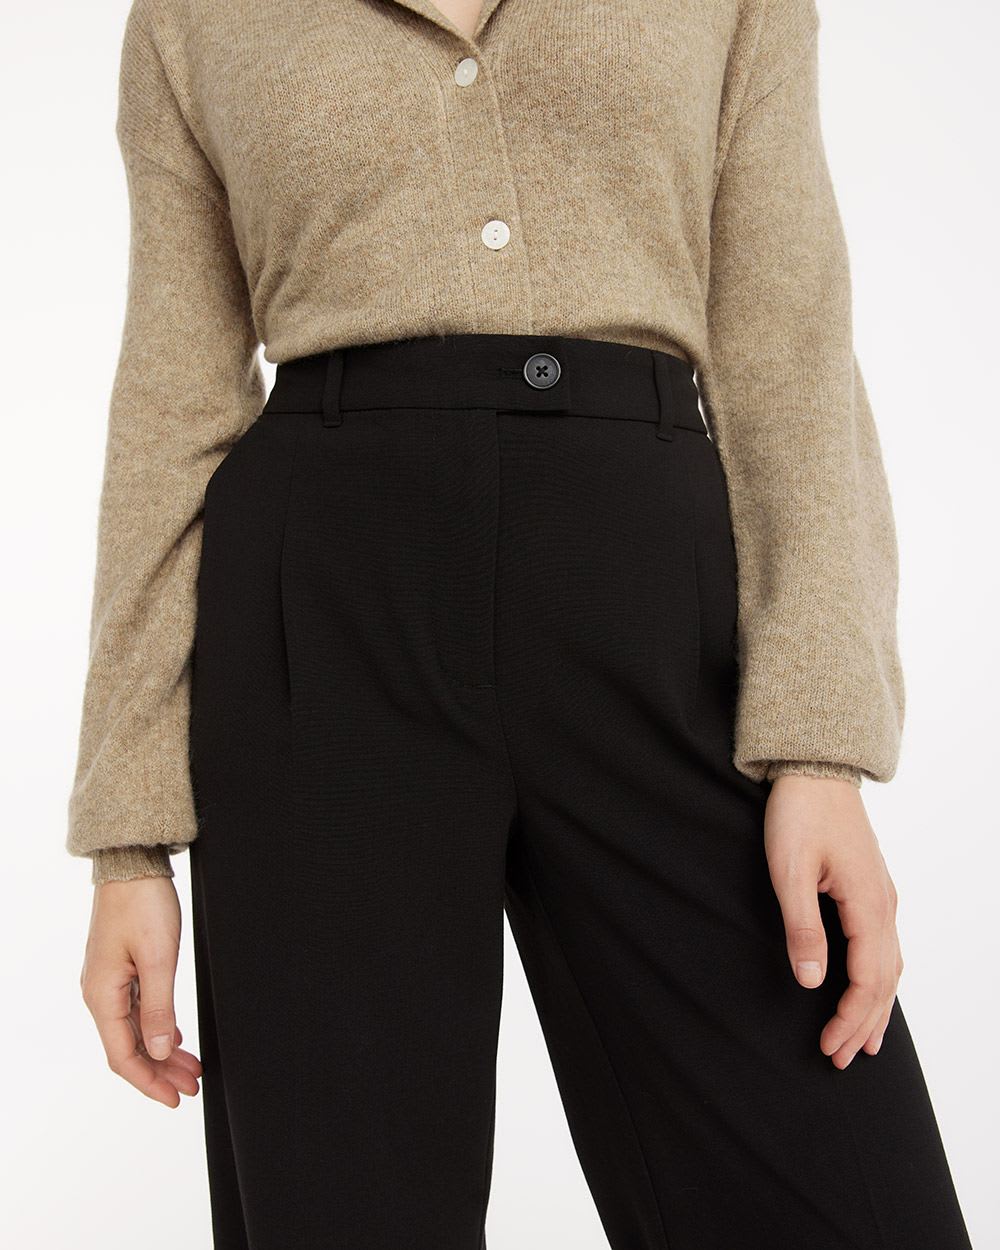 Solid Wide-Leg Trousers - Tall